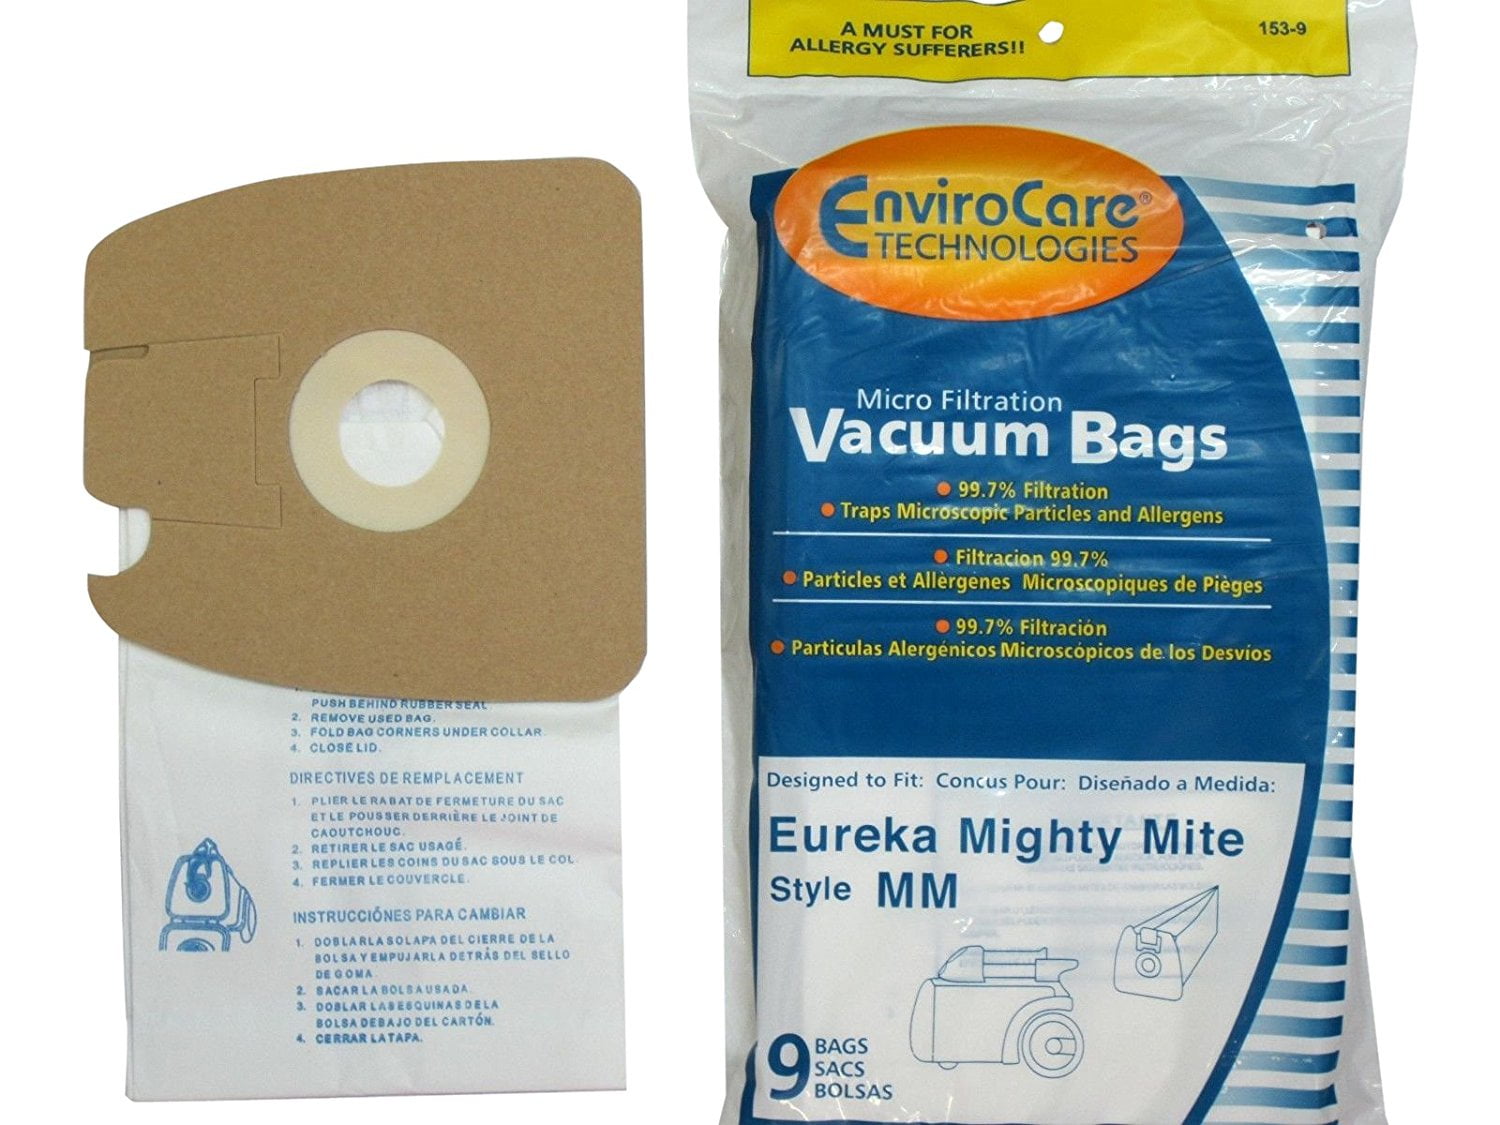 100 Eureka MM Micro-lined Mighty Mite Sanitaire Allergen Filtration Bags 